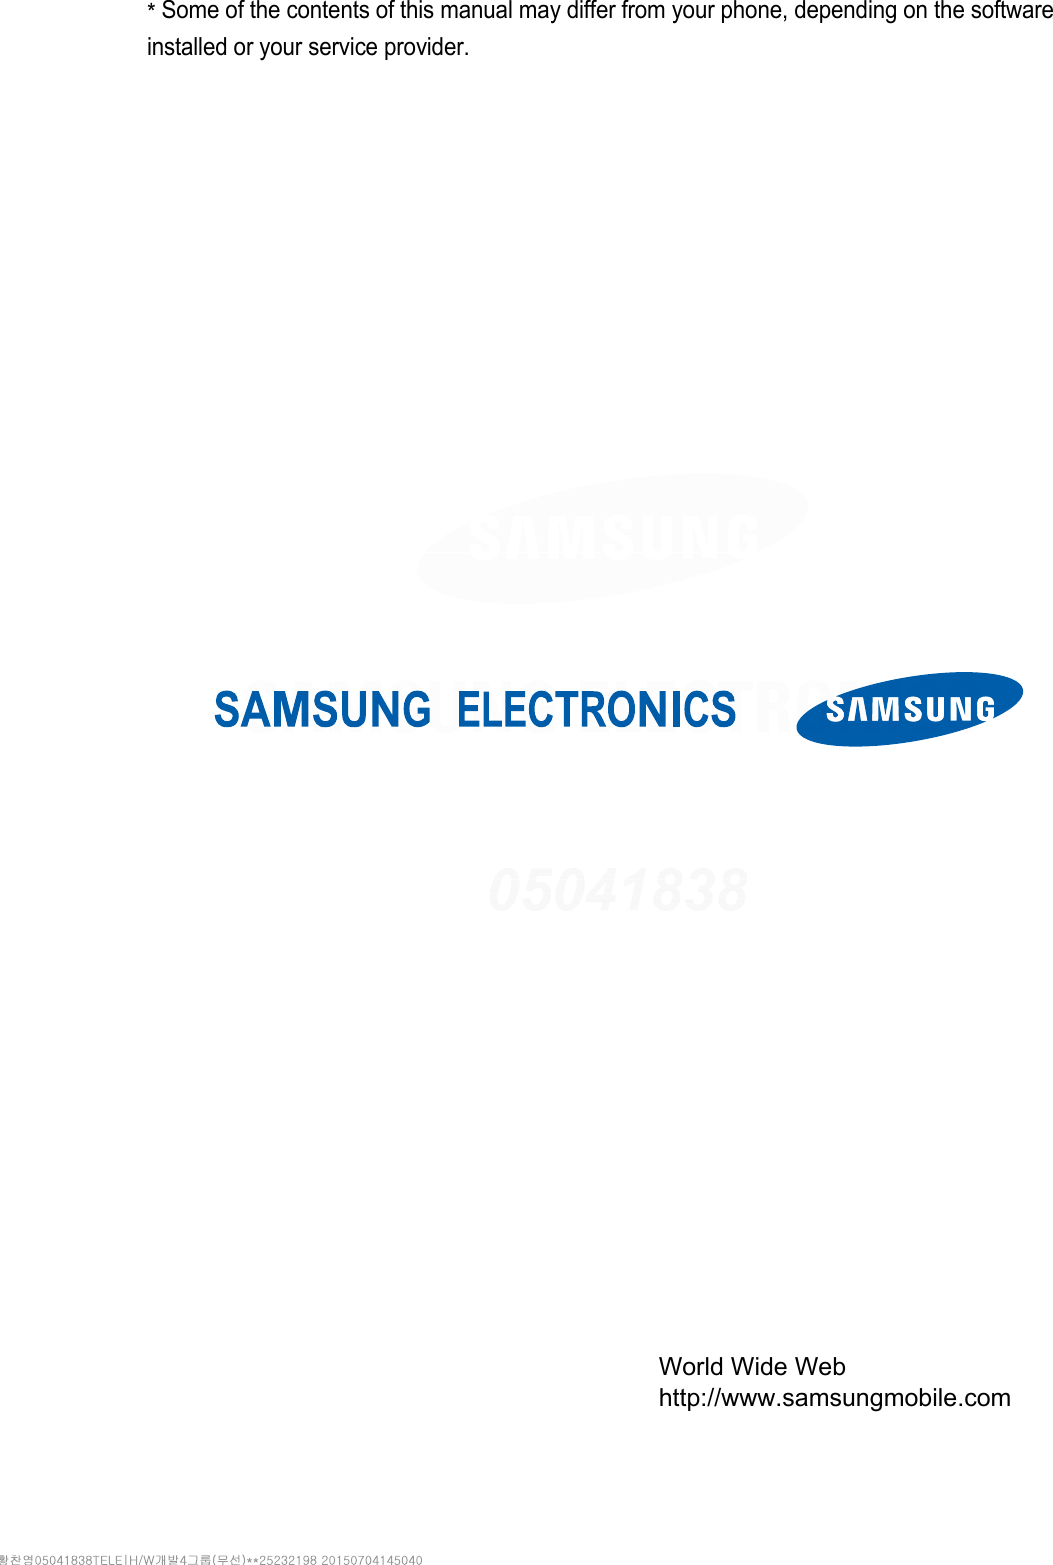 * Some of the contents of this manual may differ from your phone, depending on the software installed or your service provider.                    World Wide Web http://www.samsungmobile.com 